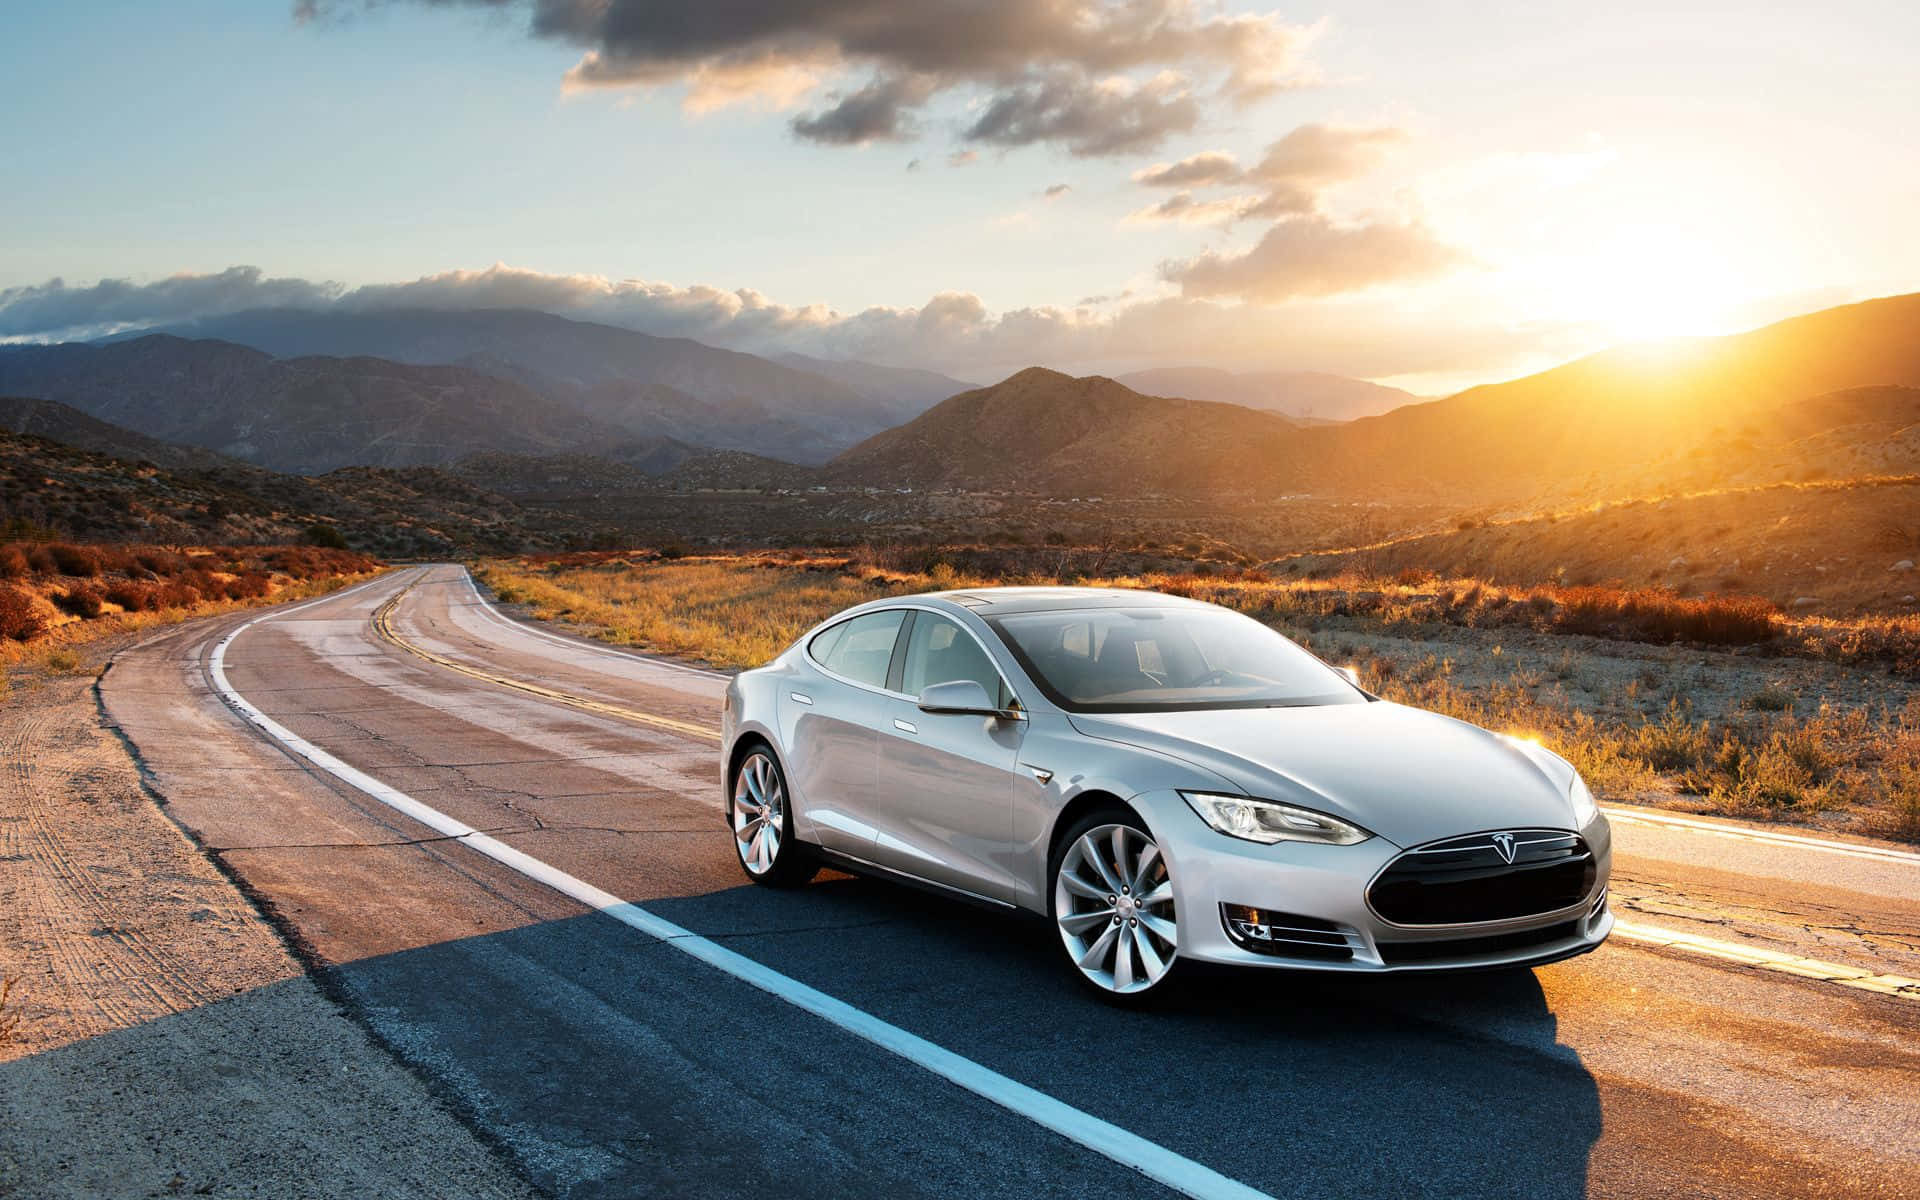 Tesla Model S Driving Down A Road In The Desert